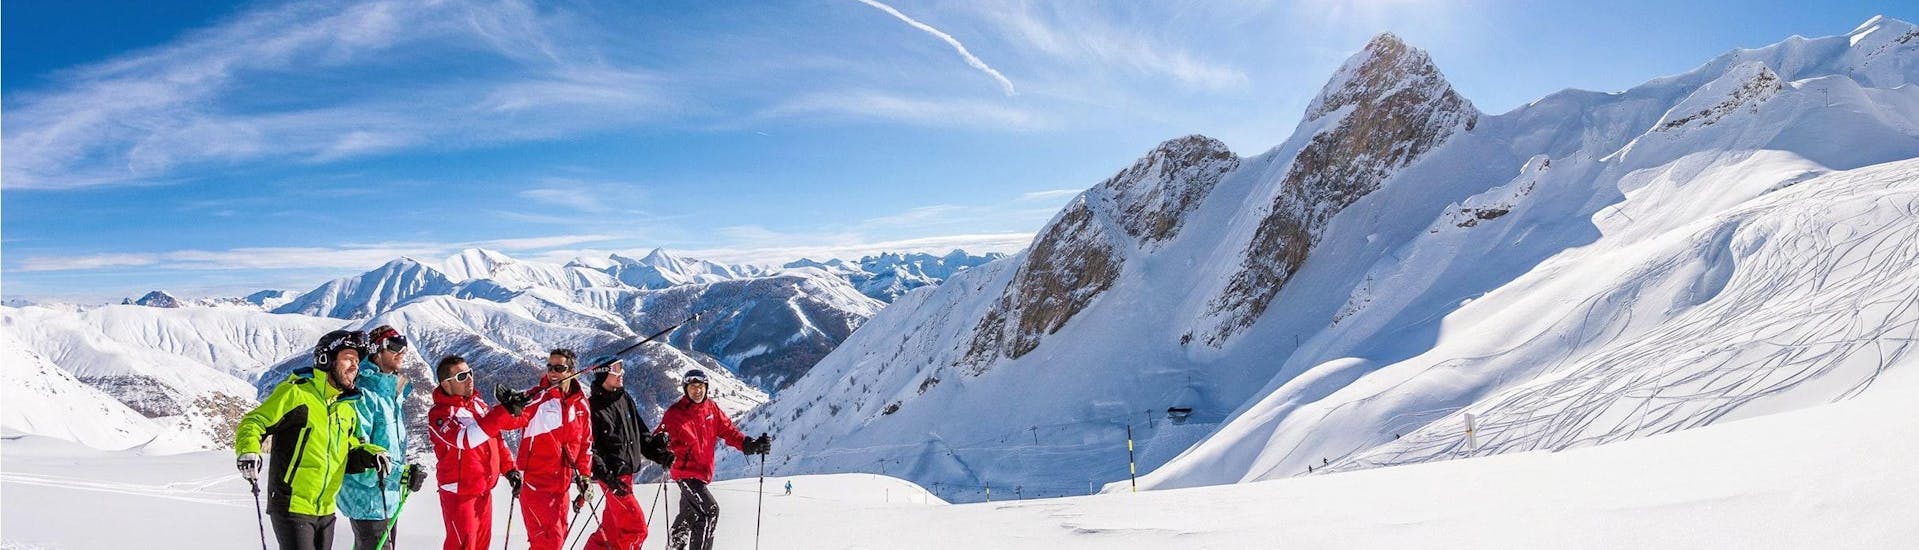 Skiers are at the top at the mountain, enjoying their Adult Ski Lessons for All Levels with the ski school ESF La Foux d'Allos.